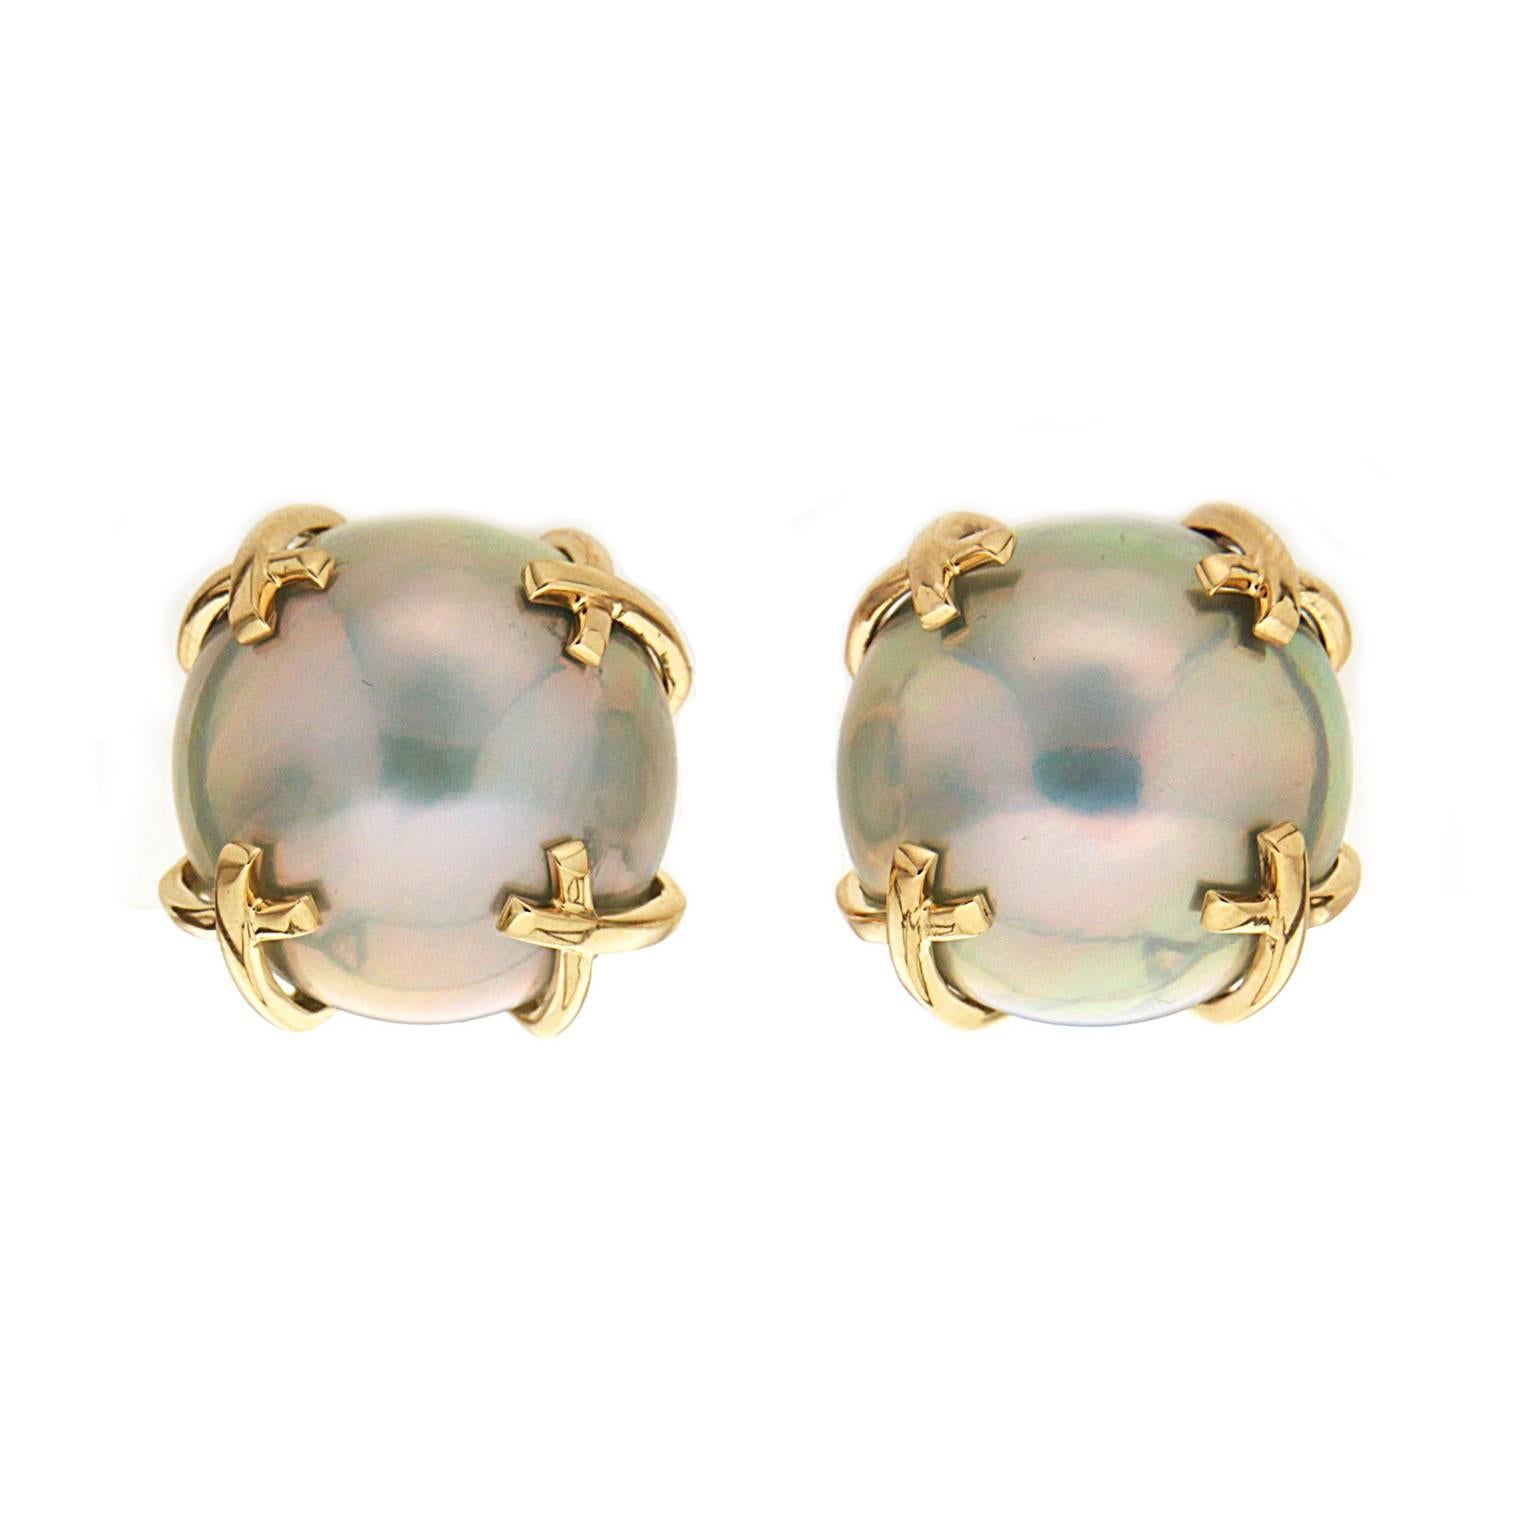 Valentin Magro Mabe Pearl Gold X Motif Earrings